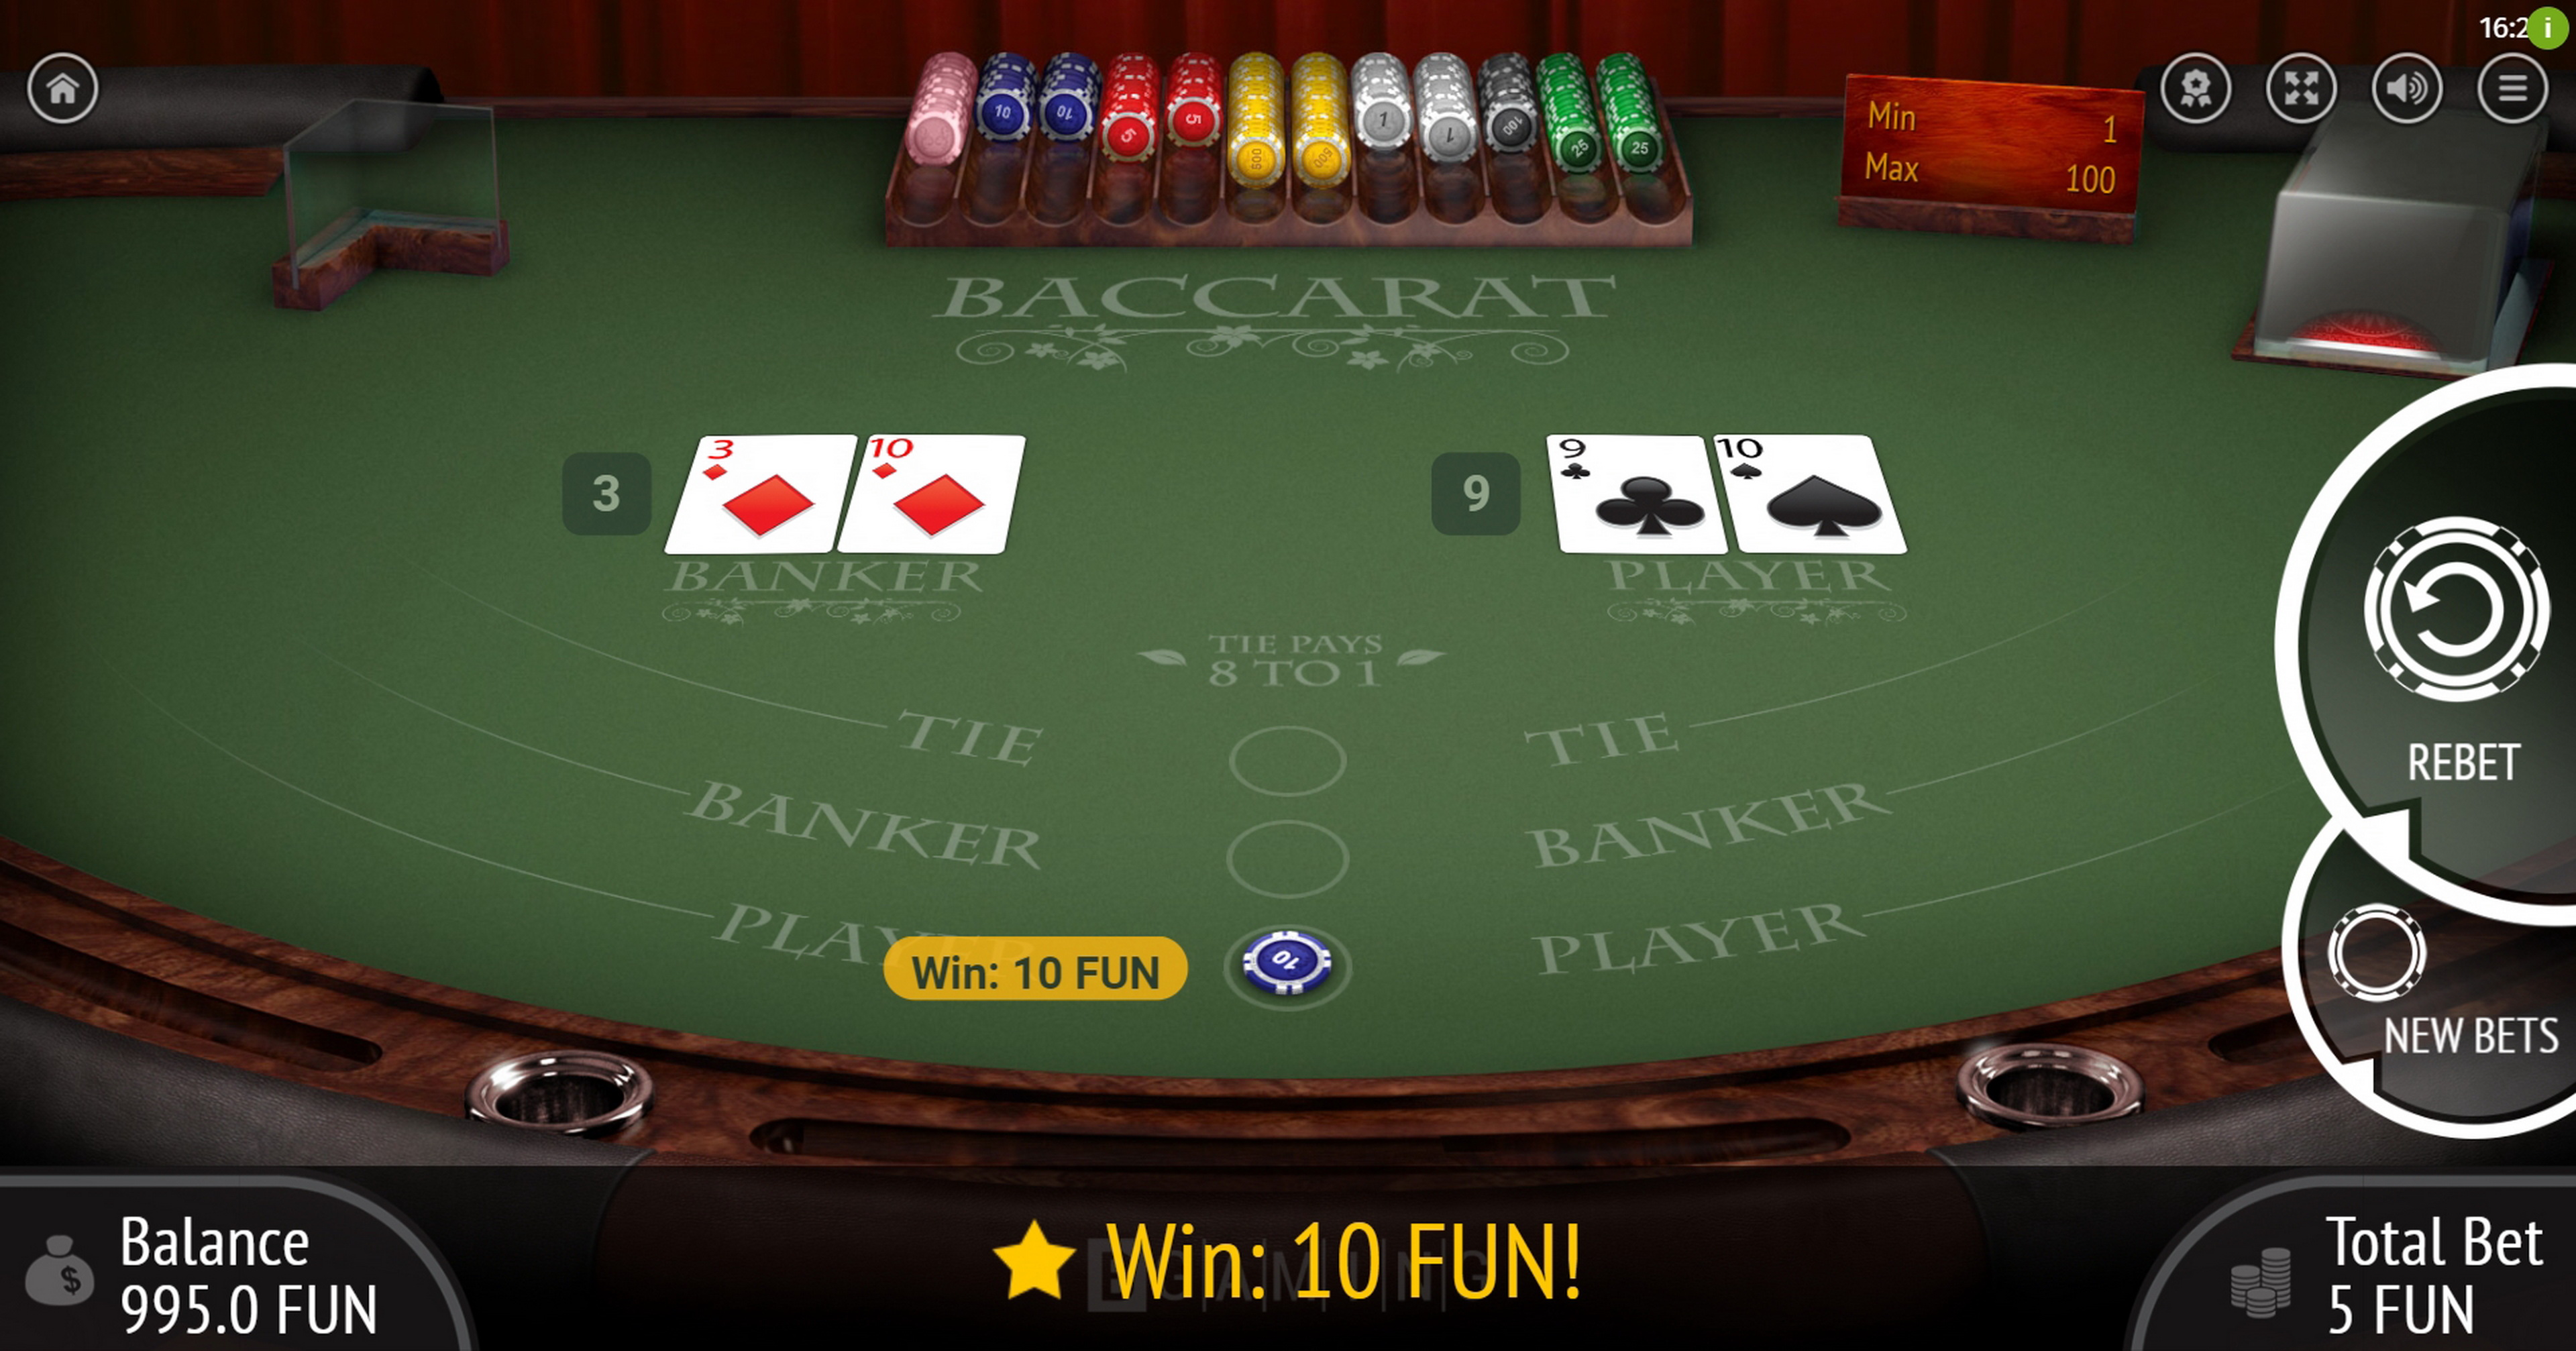 I bet on Baccarat player 10 times in a row what do I win?